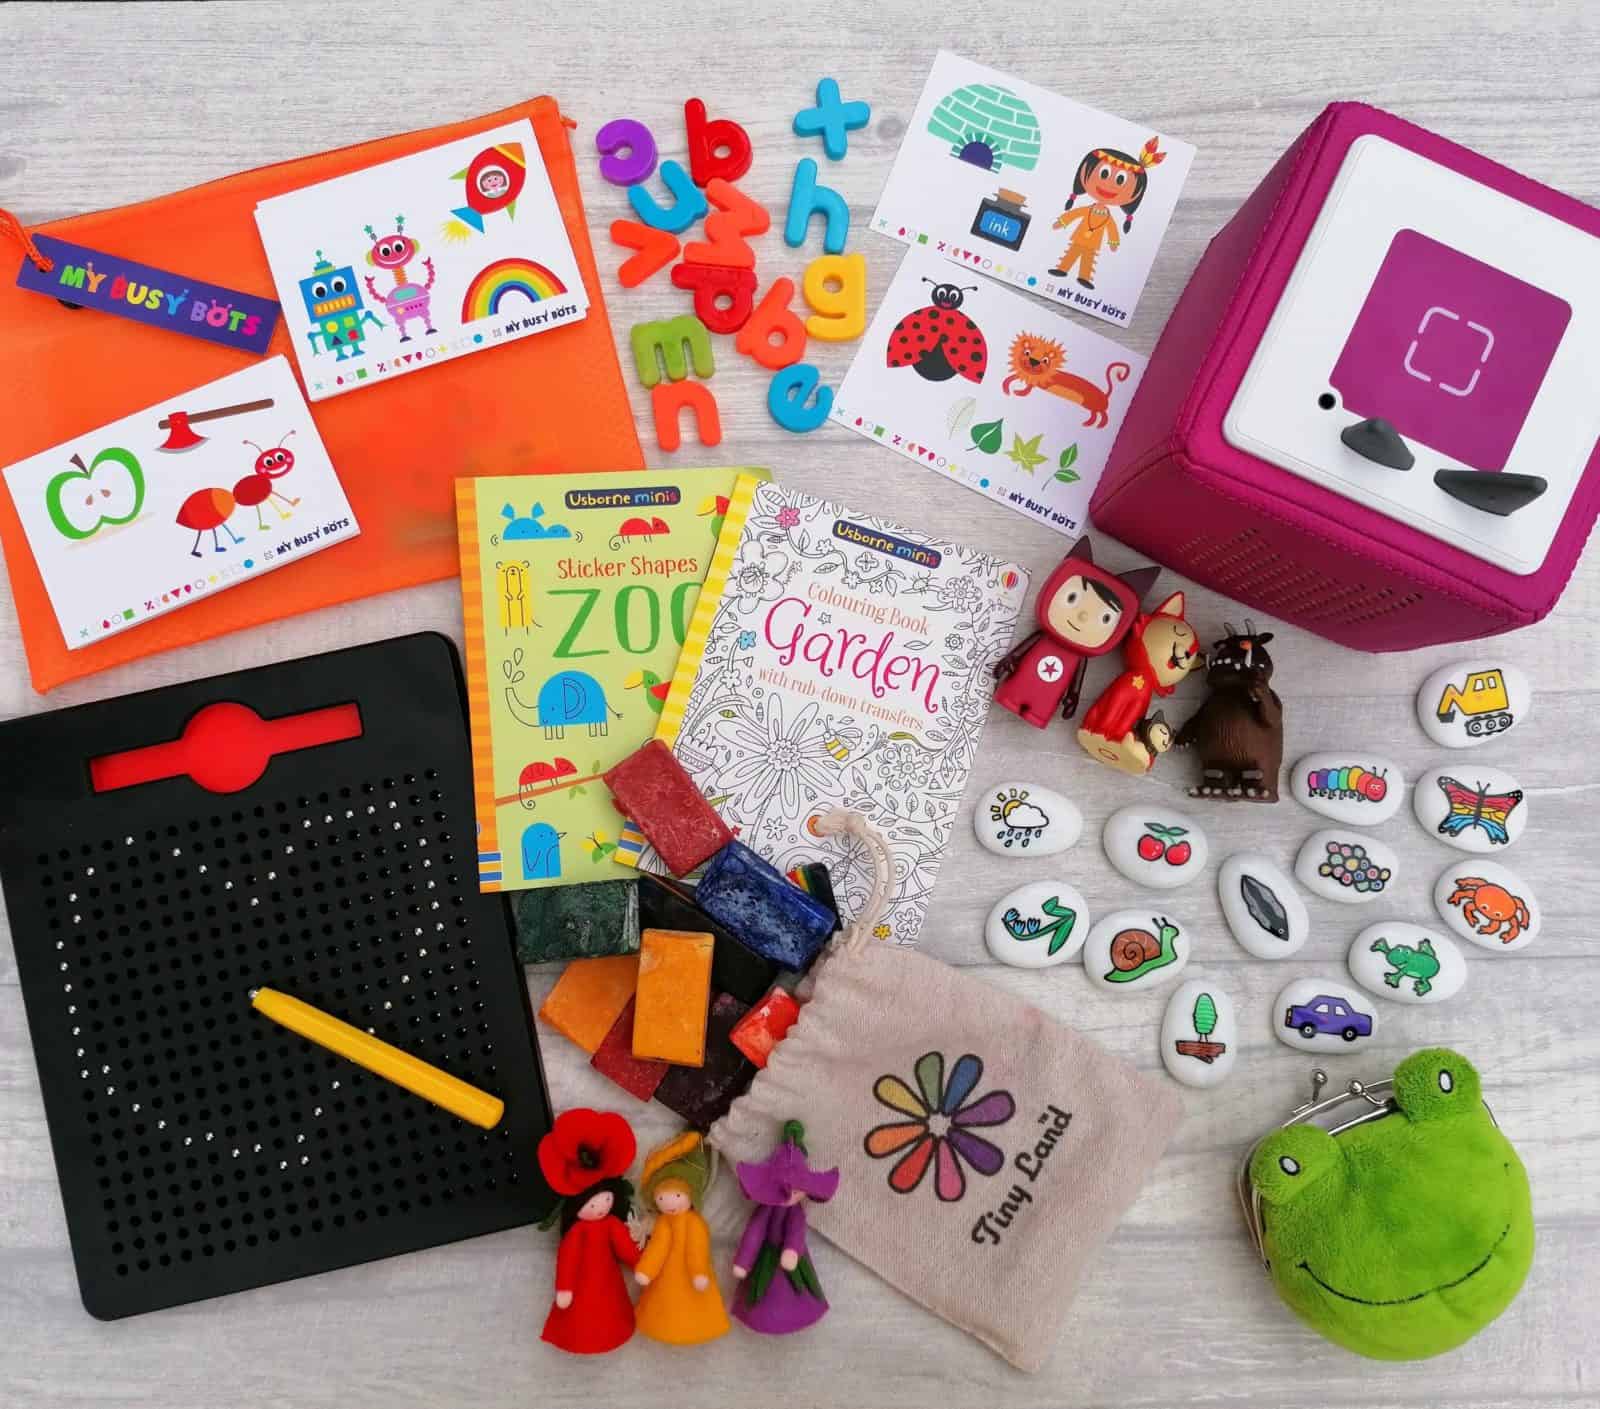 Travel play - car journey - car trips - screen free - eating out - travel toys - flight ideas - fine motor - small world - nexus magnepads - my busy bots - busy bags - quiet bags - imagistones - story stones - block crayons - waldorf - tiny land